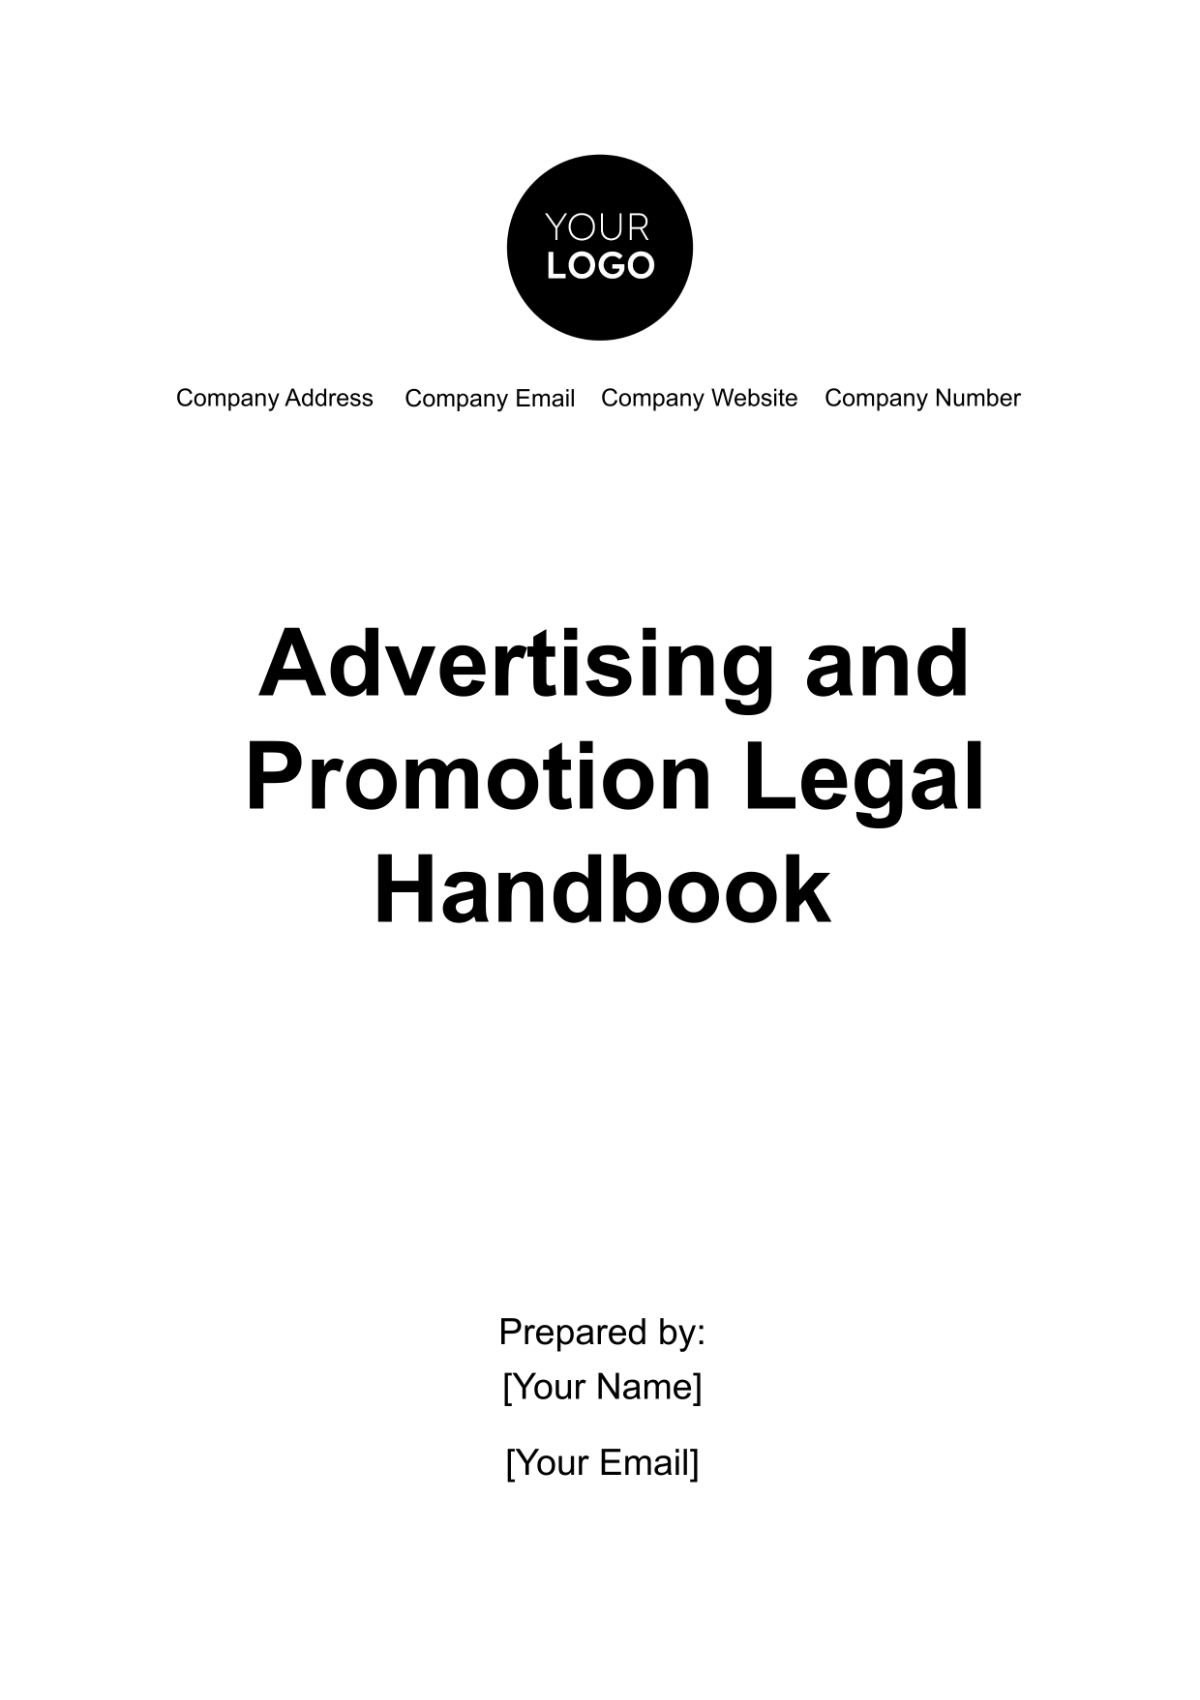 Advertising and Promotion Legal Handbook Template